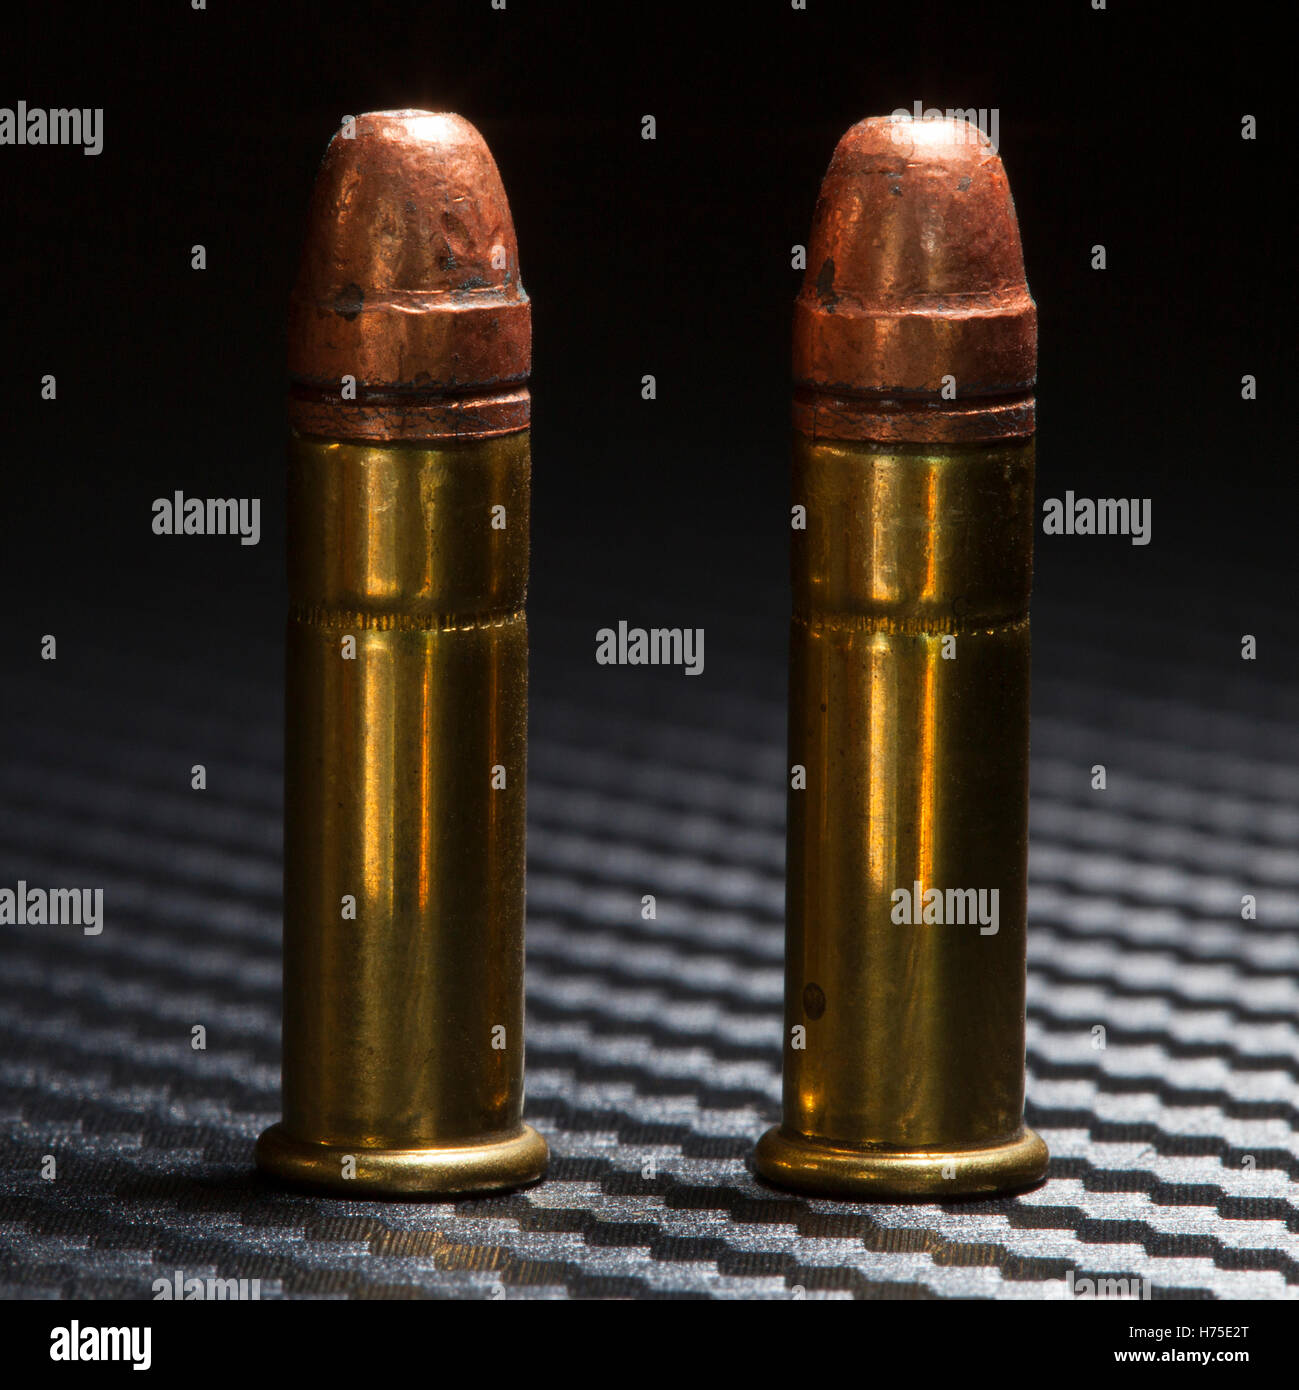 Cartridges with copper bullets used in rimfire firearms Stock Photo